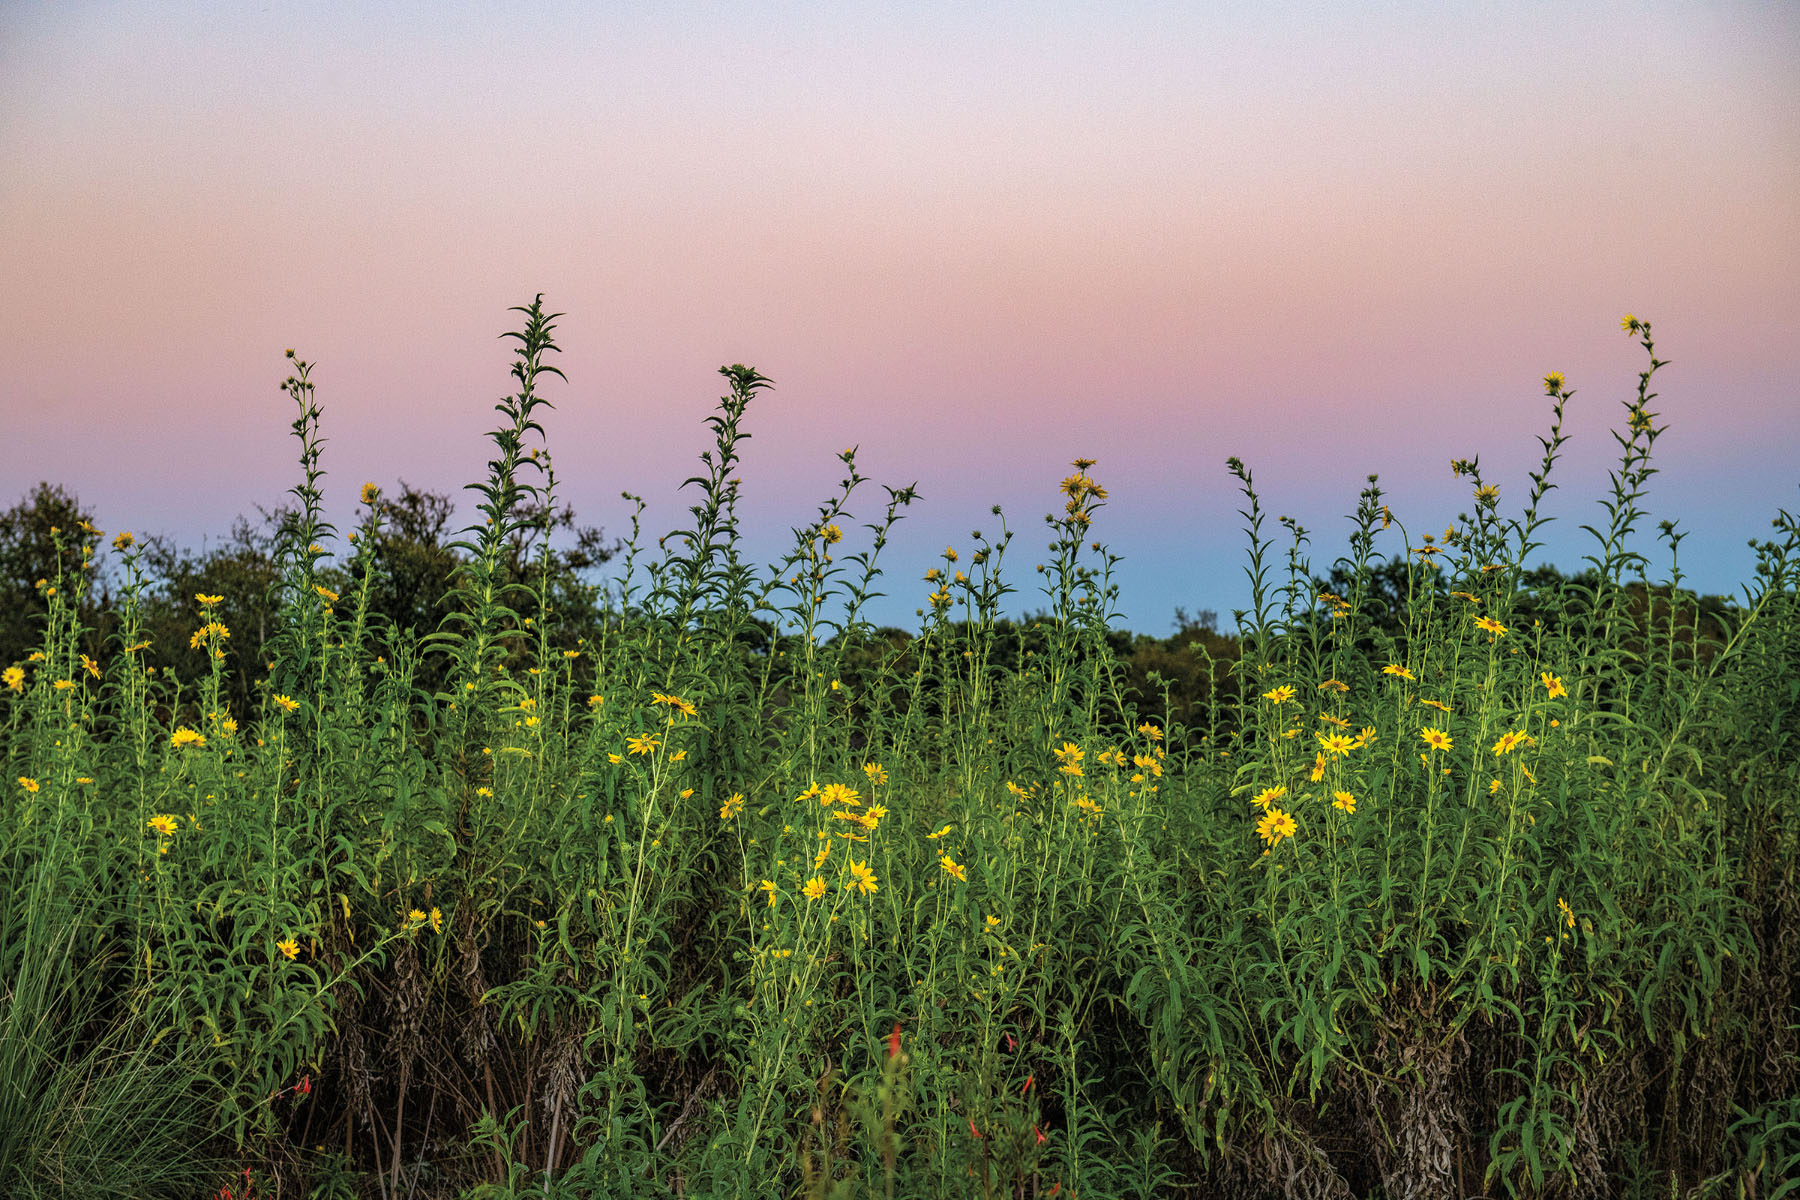 Tall, green stems with yellow flowers grow in front of a pink and blue sunset